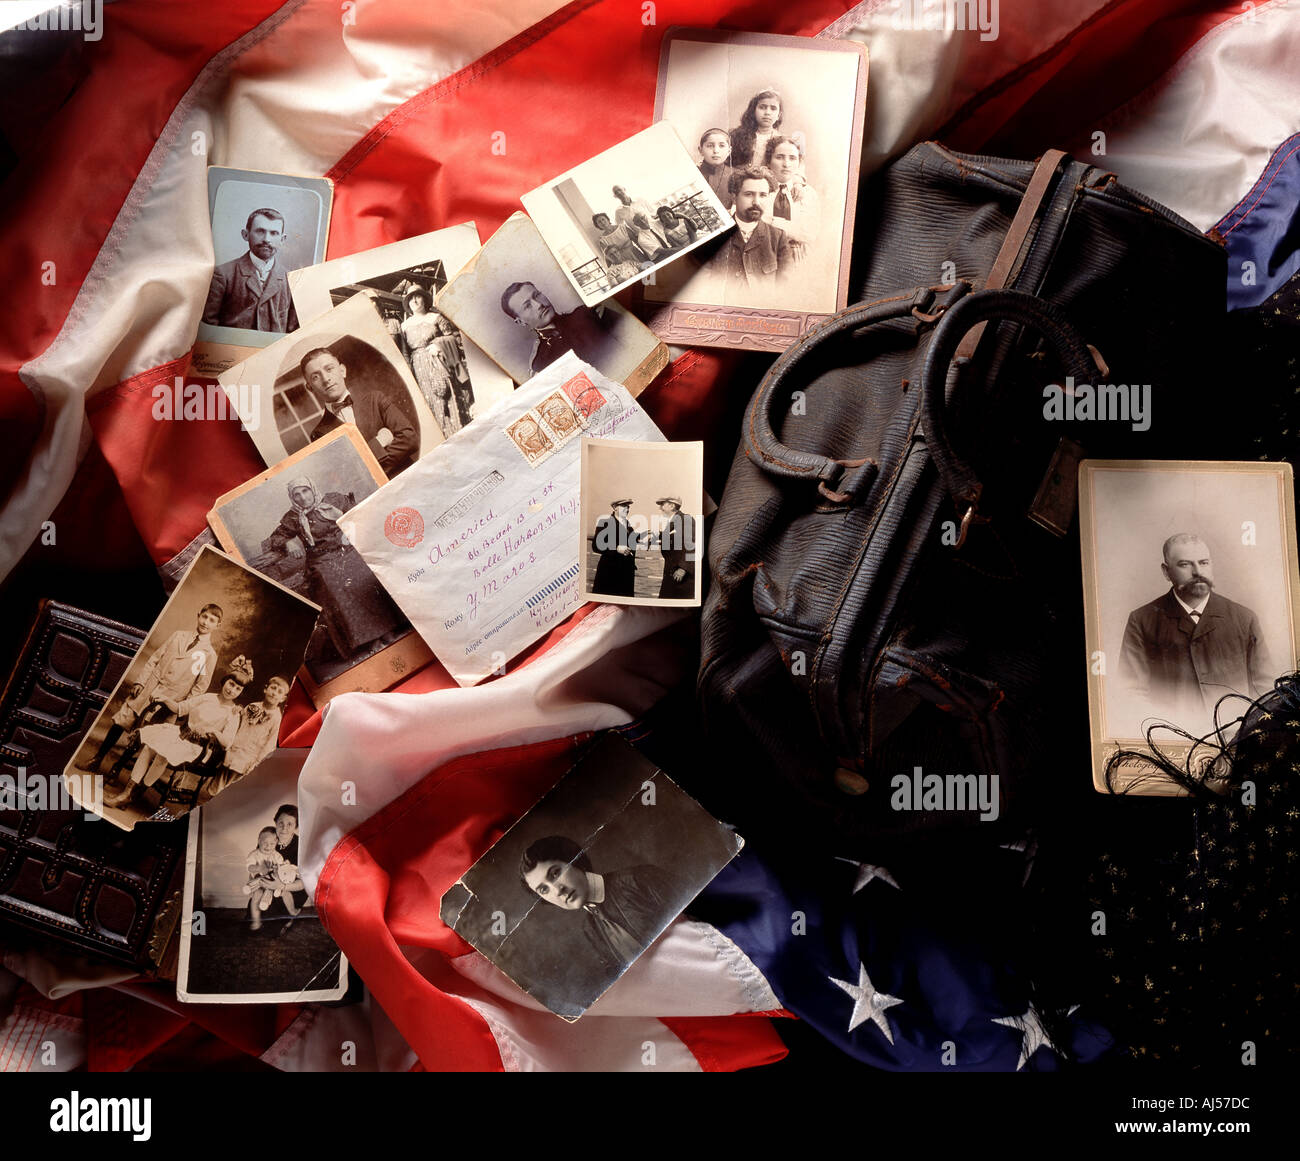 Still life of Immigrant family mementos Against an American flag background Stock Photo